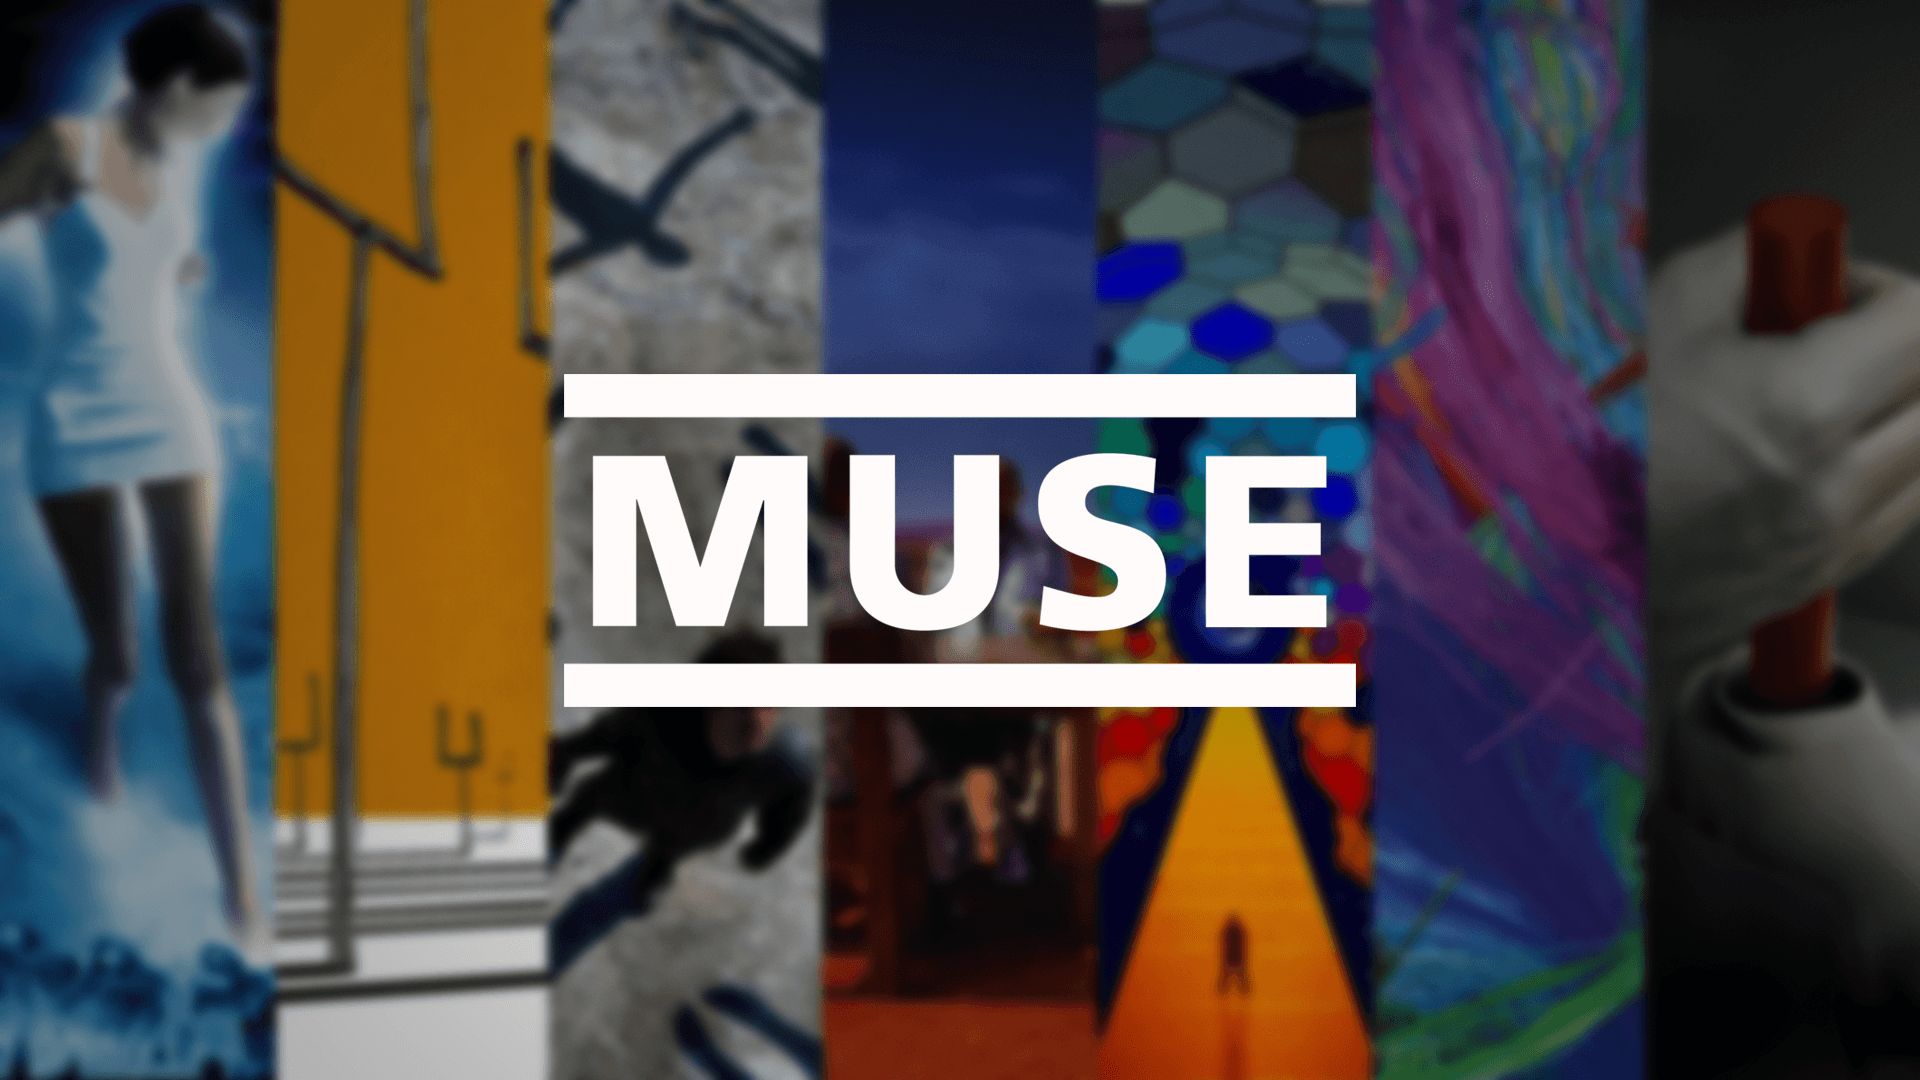 Here is a simple Muse wallpaper I made. [1920x1080]